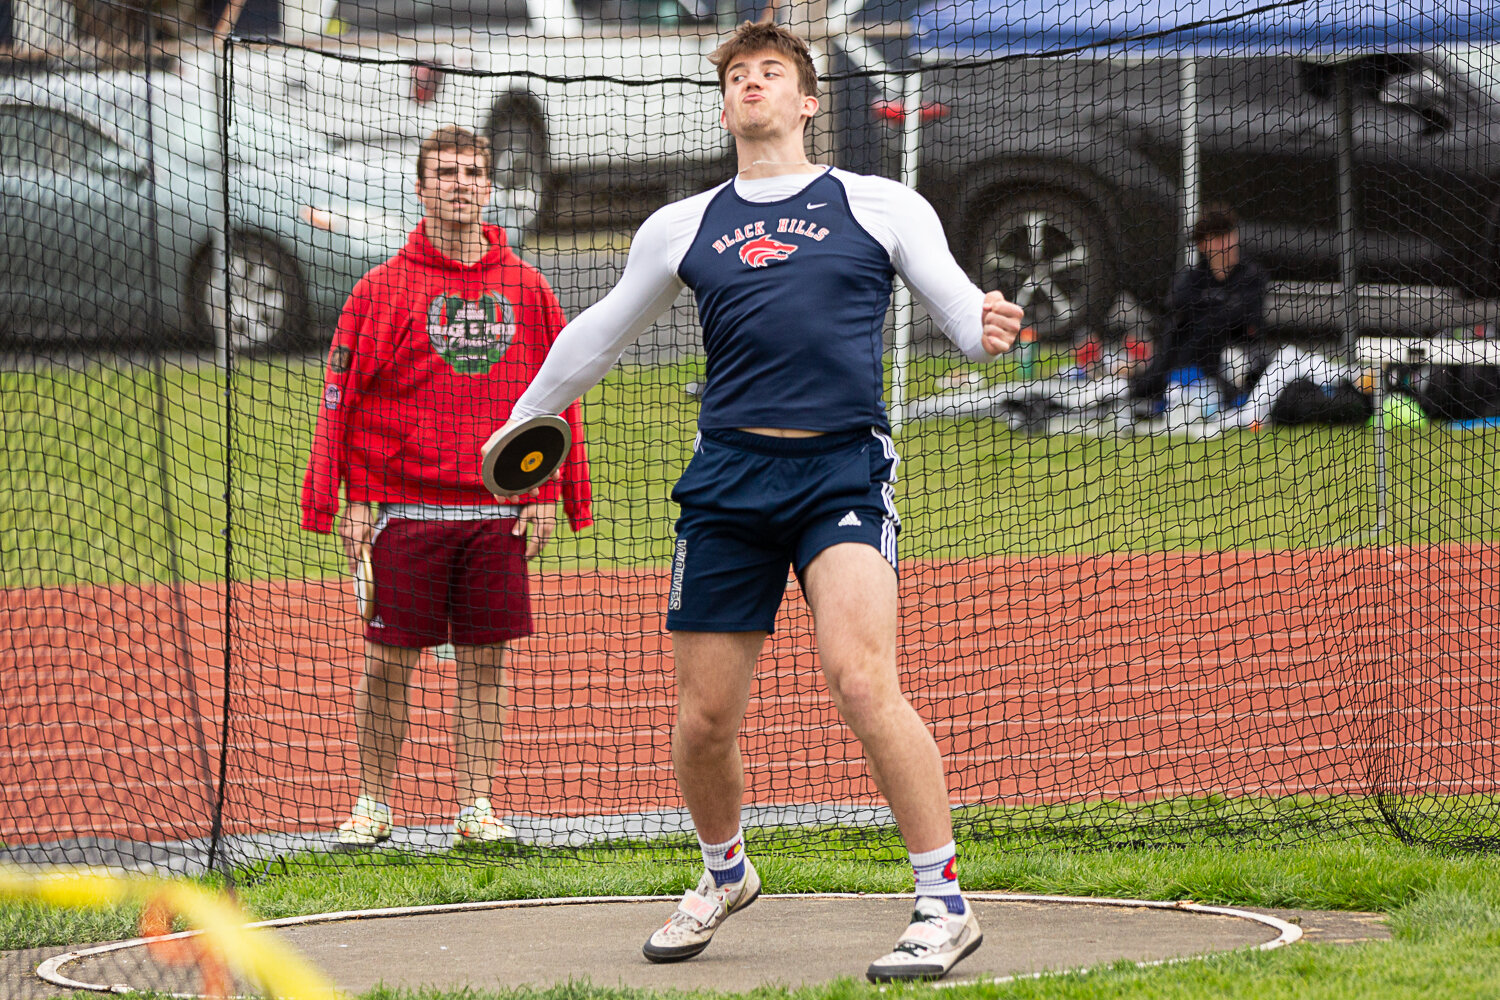 Black Hills' Liam Wall launches a discus at the Chehalis Activators Classic April 22 at W.F. West.